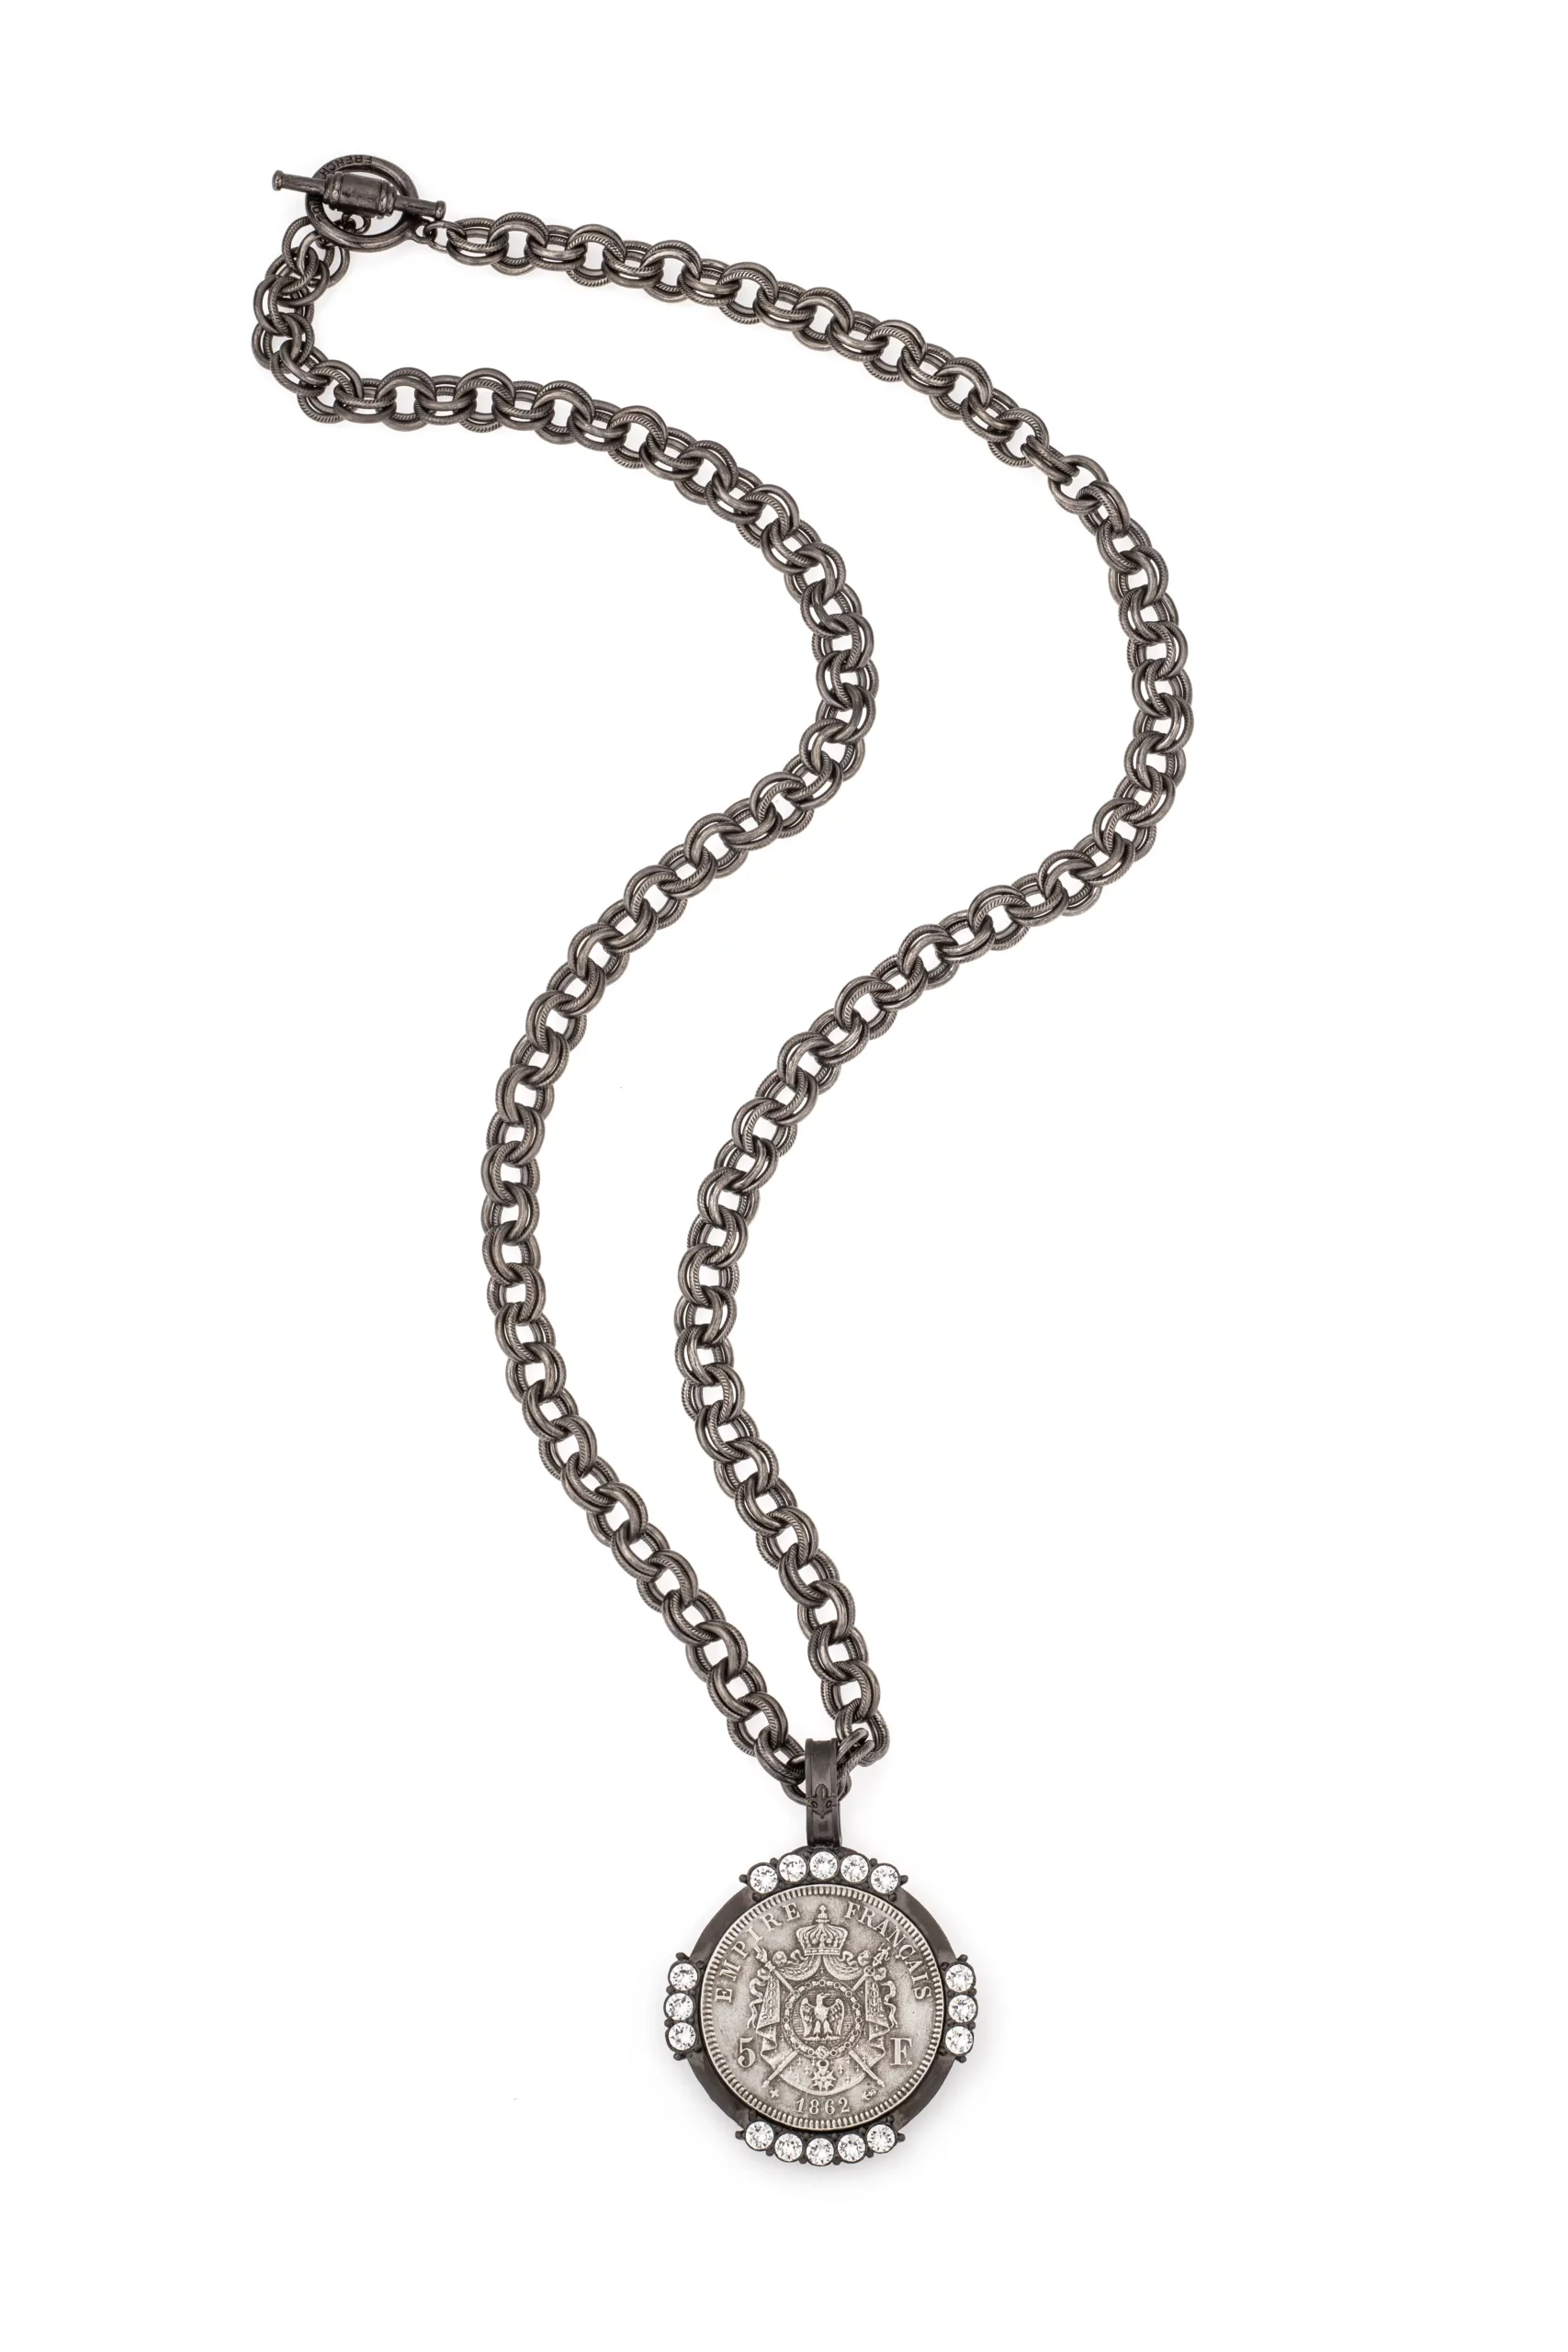 The Danique chain necklace features French Kande Provence chain and vintage French medallion.